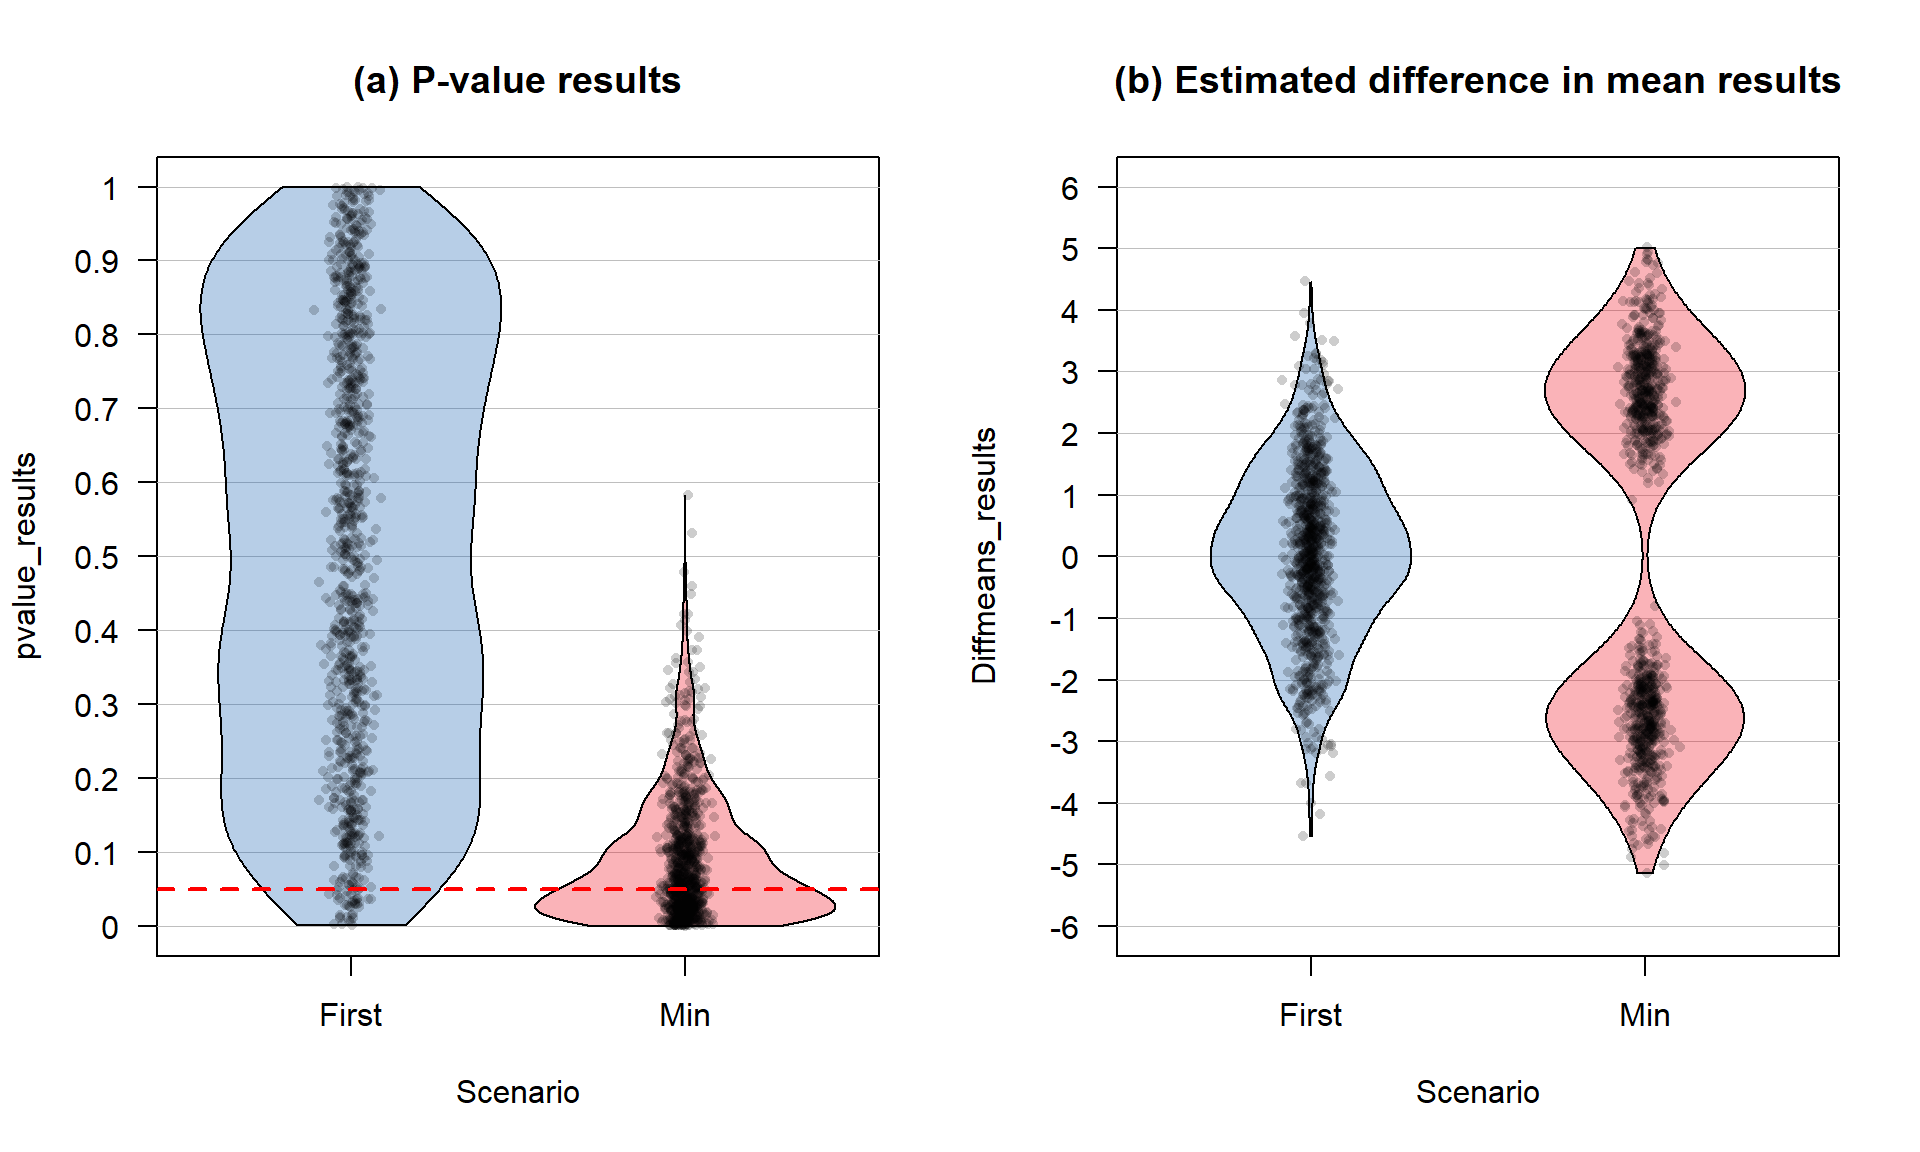 Pirate-plot of a simulation study results. Panel (a) contains the B = 1,000 p-values and (b) contains the B = 1,000 estimated differences in the means. Note that the estimated means and confidence intervals normally present in pirate-plots are suppressed here with inf.f.o = 0, inf.b.o = 0, avg.line.o = 0 because these plots are being used to summarize simulation results instead of an original data set.